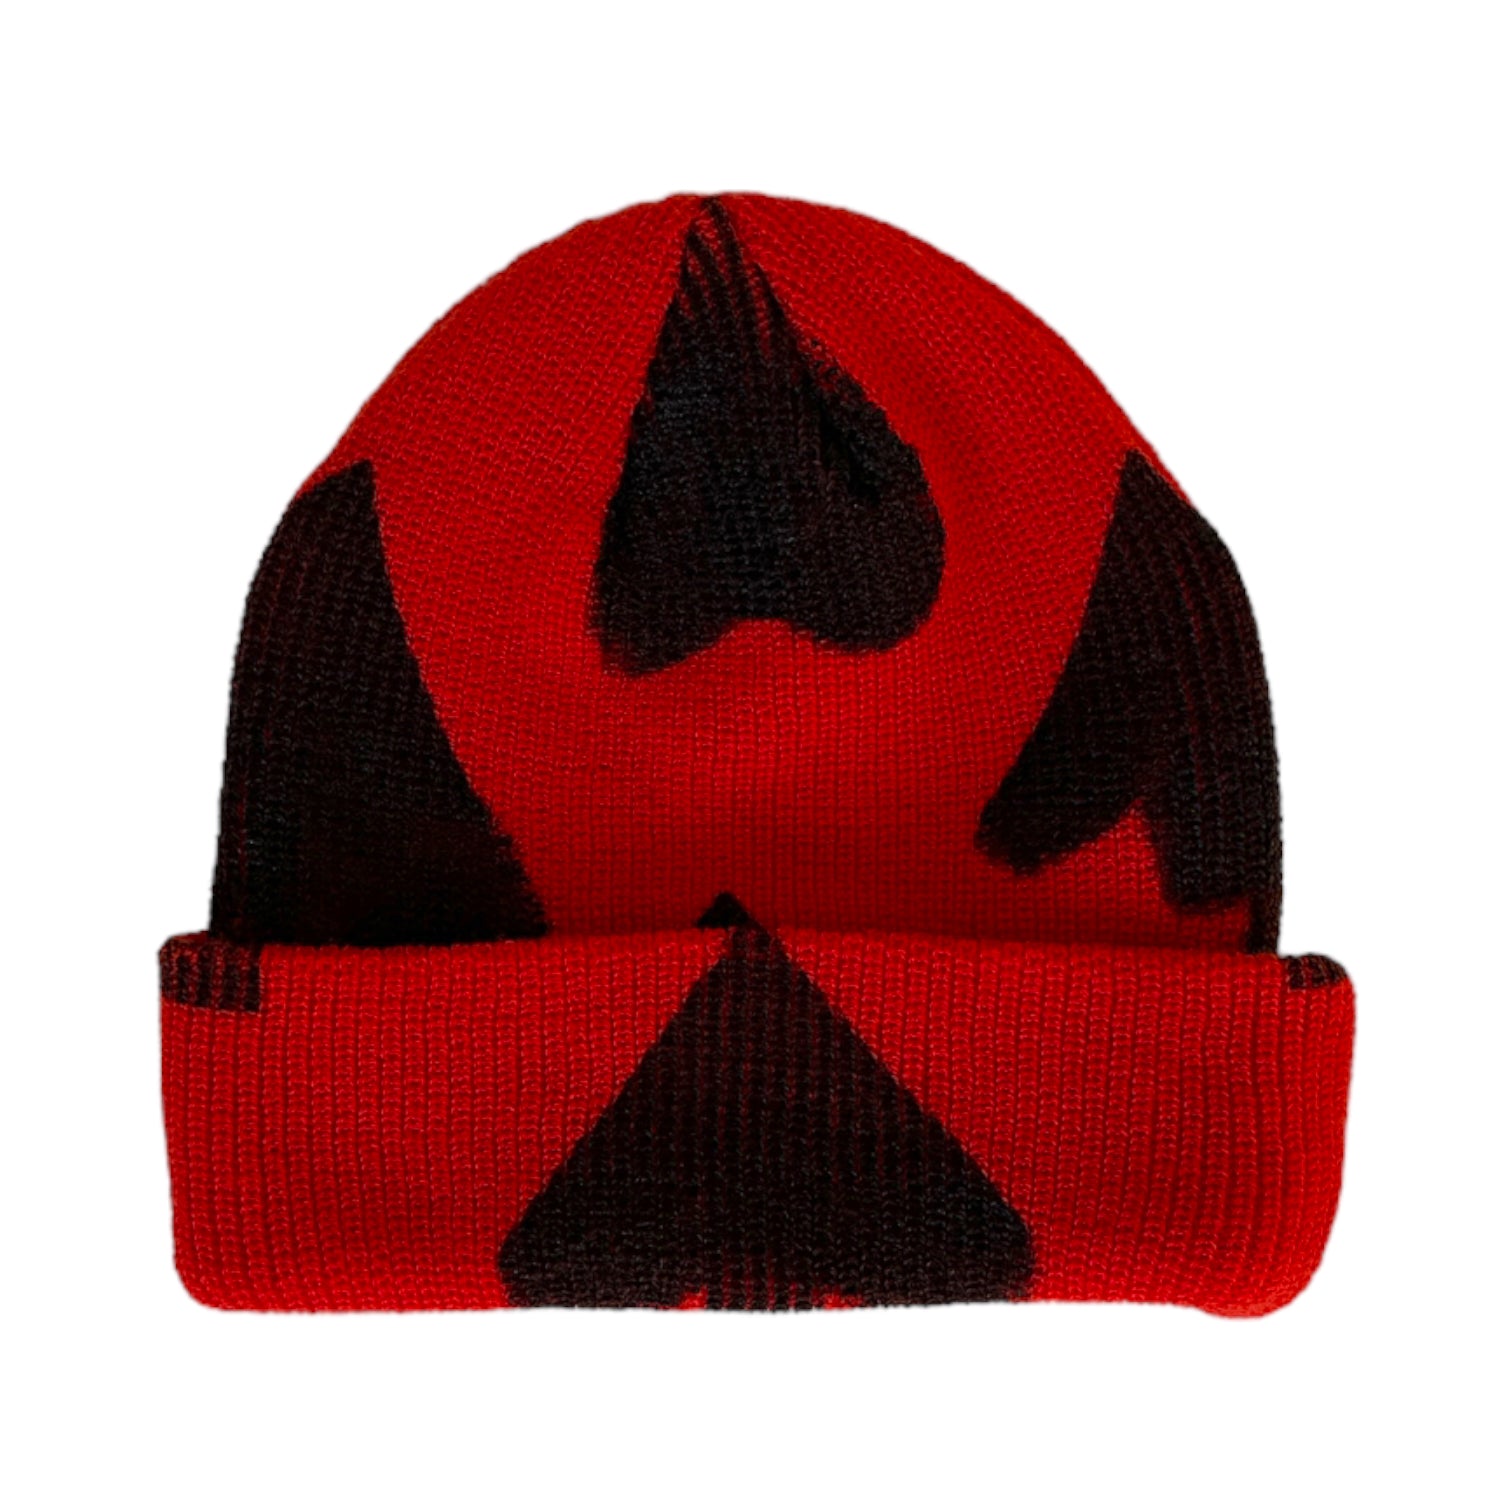 back of red beanie with black hand painted hearts